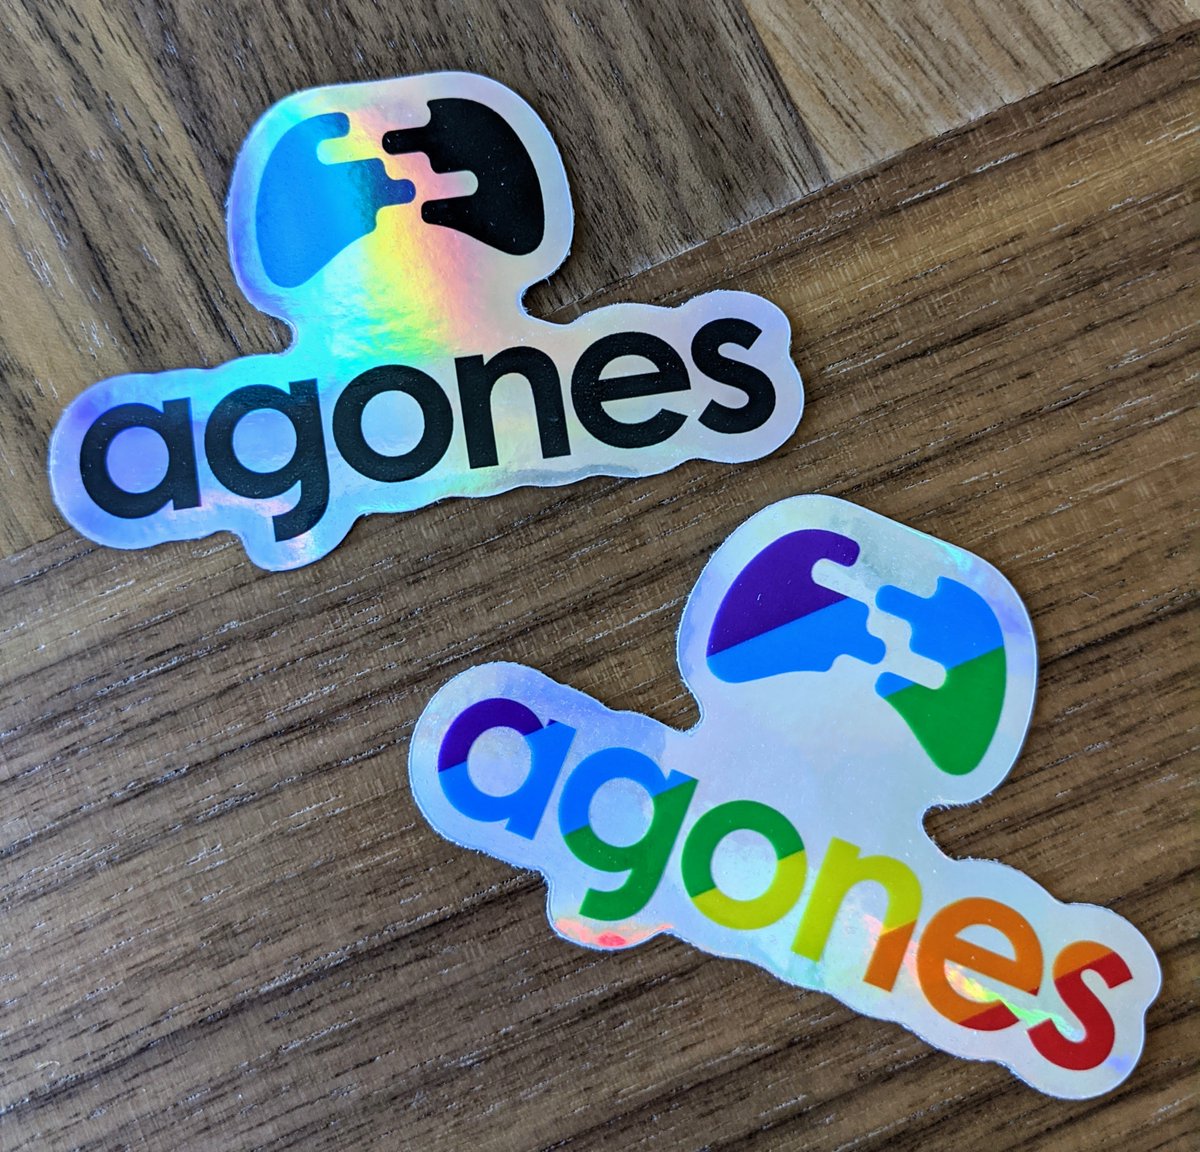 We're at #KubeCon this week with shiny new stickers! Get yours first at our workshop this afternoon - starts at 3pm and seats still open! sched.co/W53Y
#kubecon2019